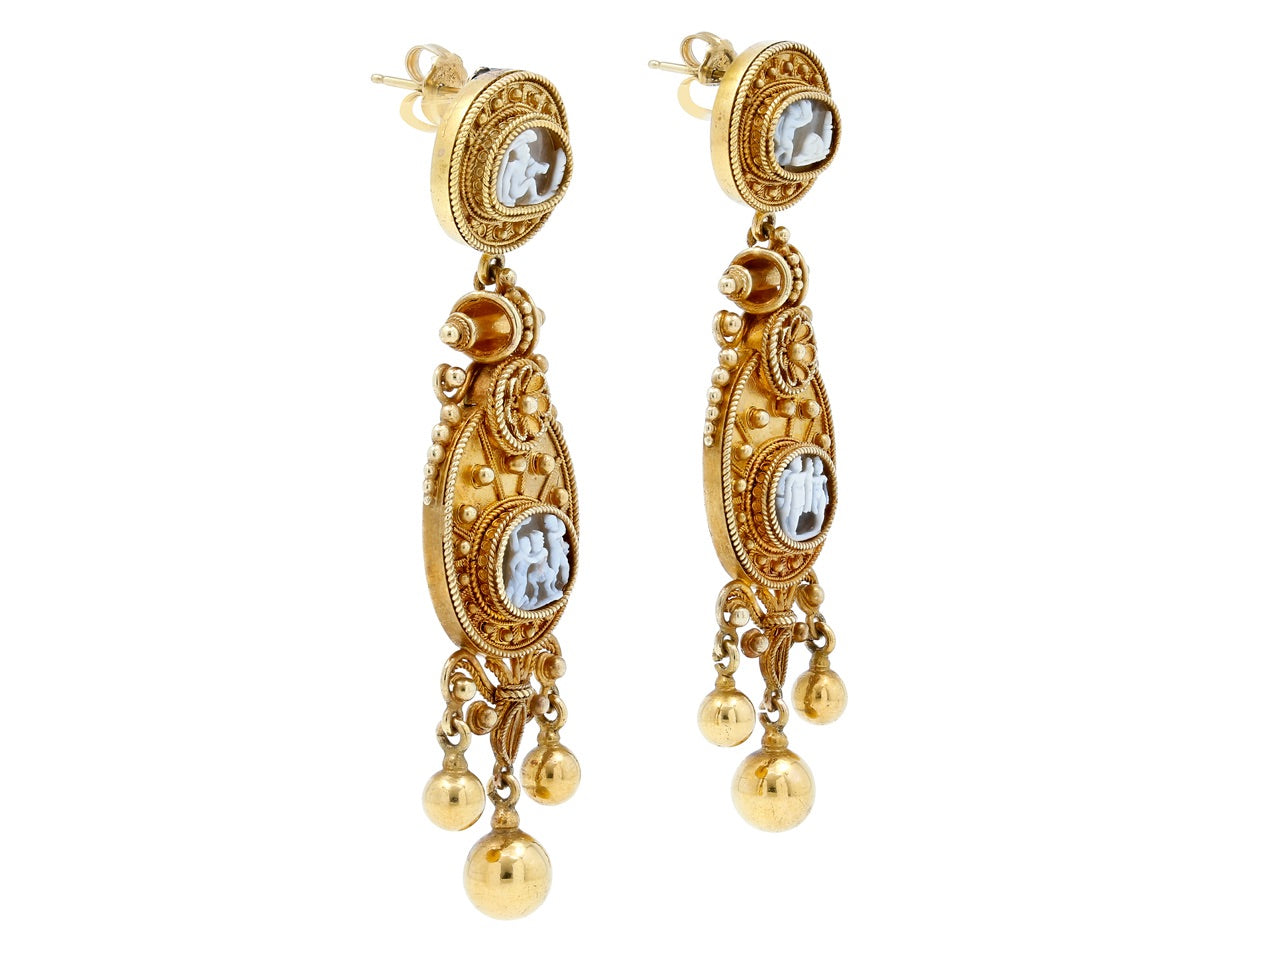 Antique Victorian Etruscan Revival Cameo Earrings in 18K Gold